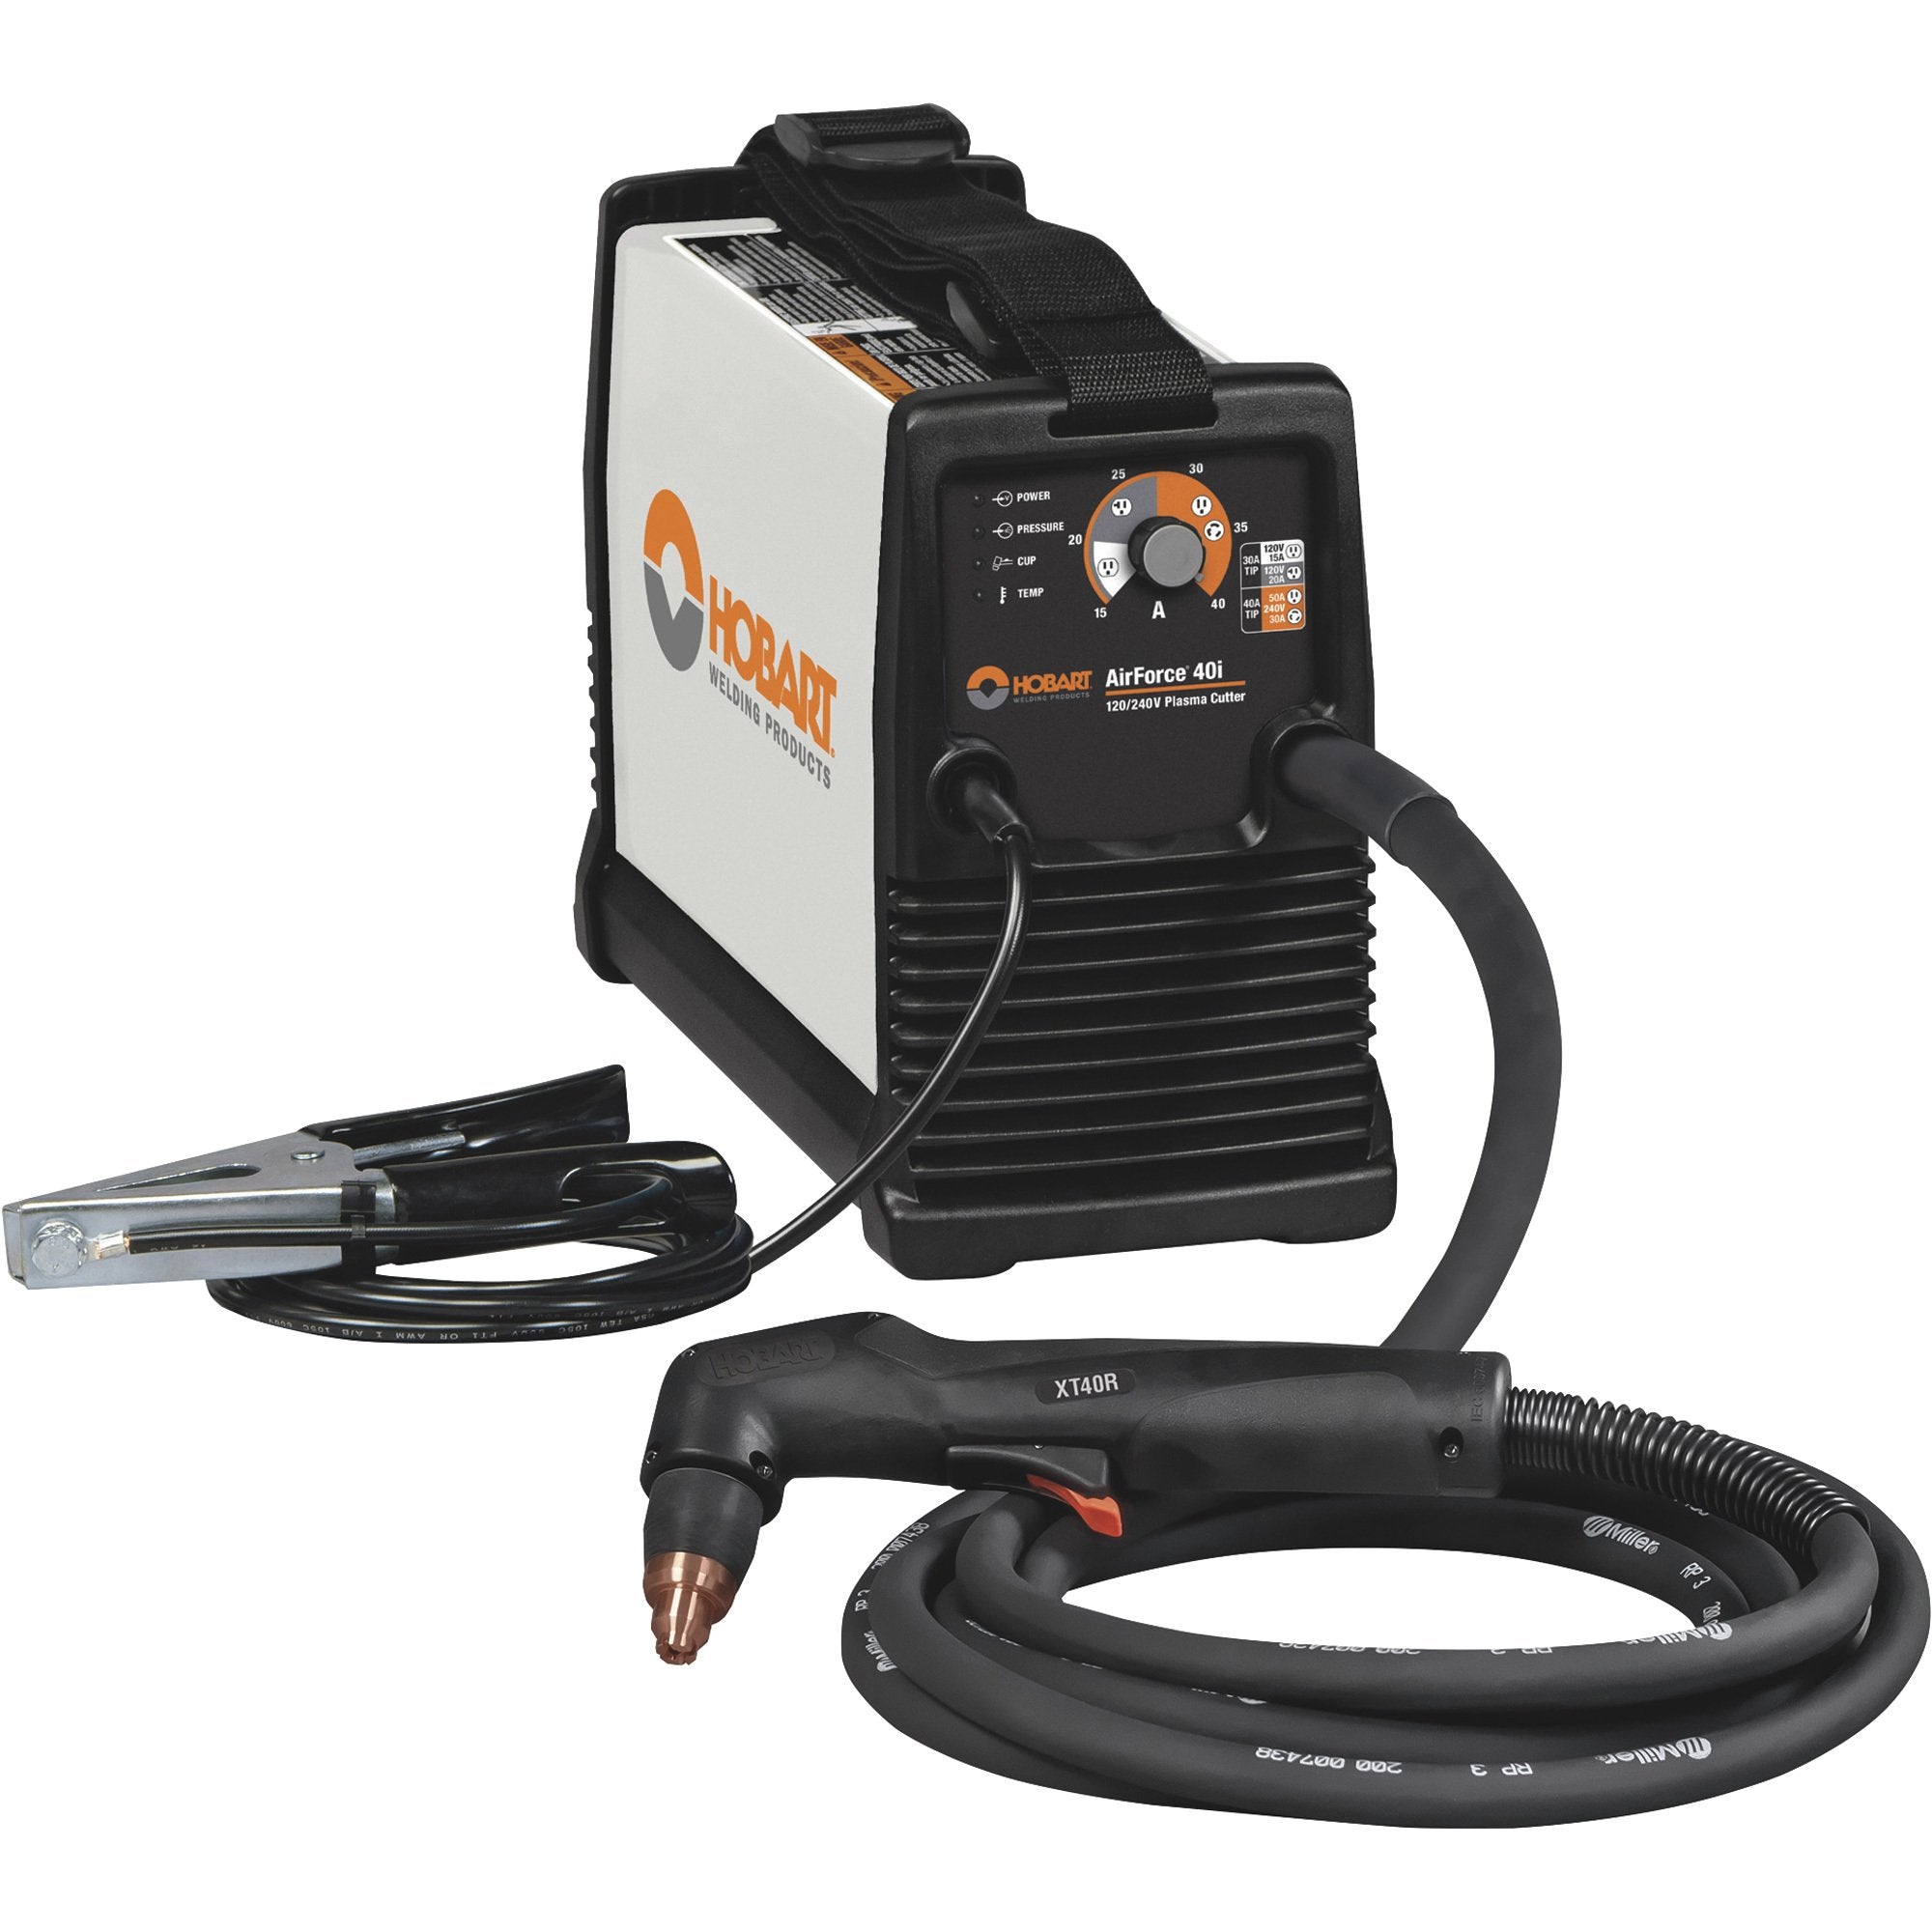 Hobart 500575 Airforce 27i 120/240V Plasma Cutter with XT30R Torch and MVP Power Cord System New